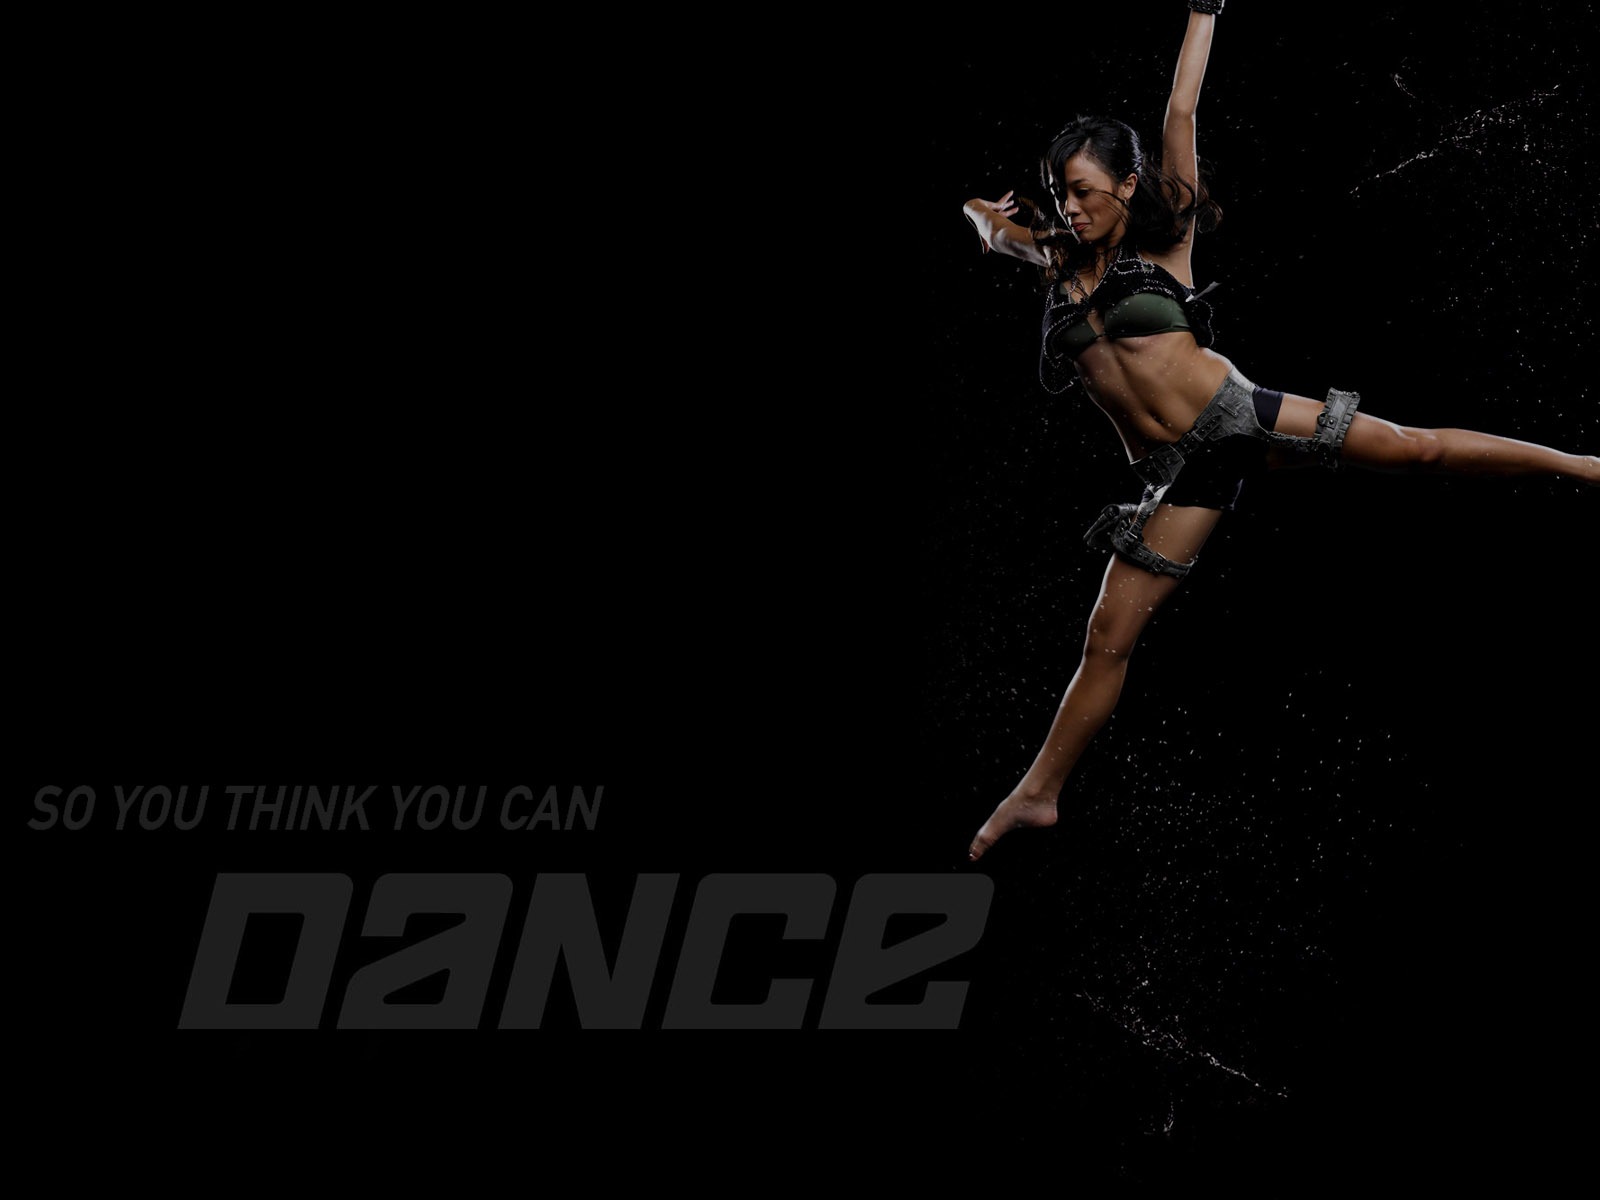 So You Think You Can Dance 舞林争霸 壁纸(二)3 - 1600x1200